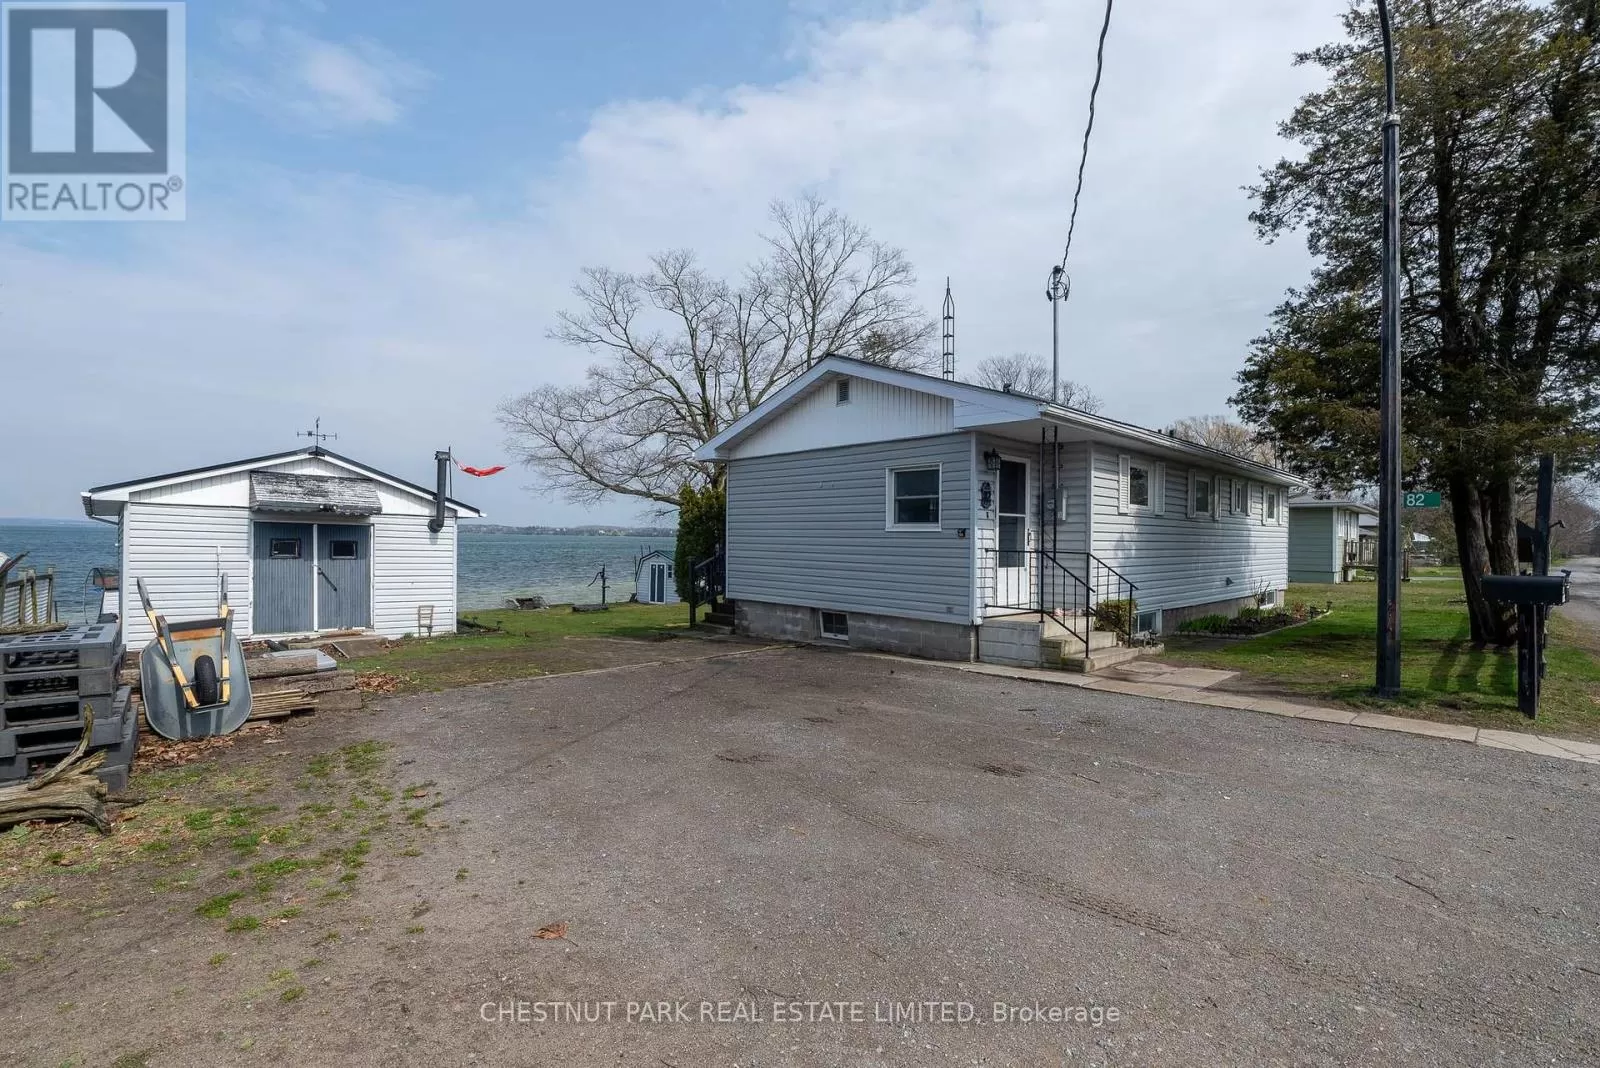 House for rent: 82 Outlet Rd, Prince Edward County, Ontario K0K 1P0